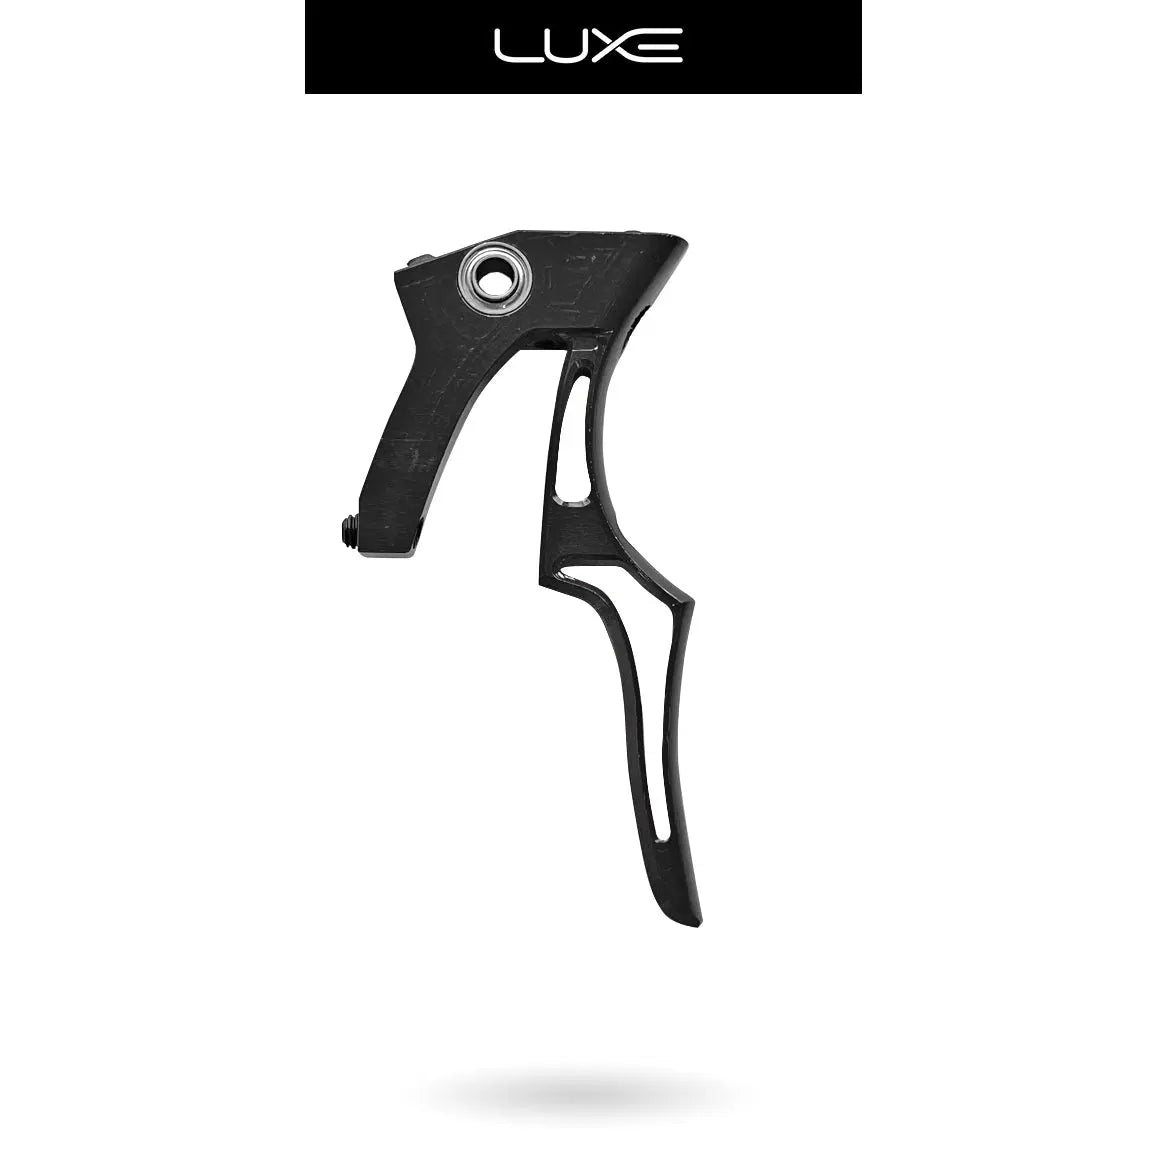 LUXE DEUCE TRIGGER TYPE S Infamous Paintball